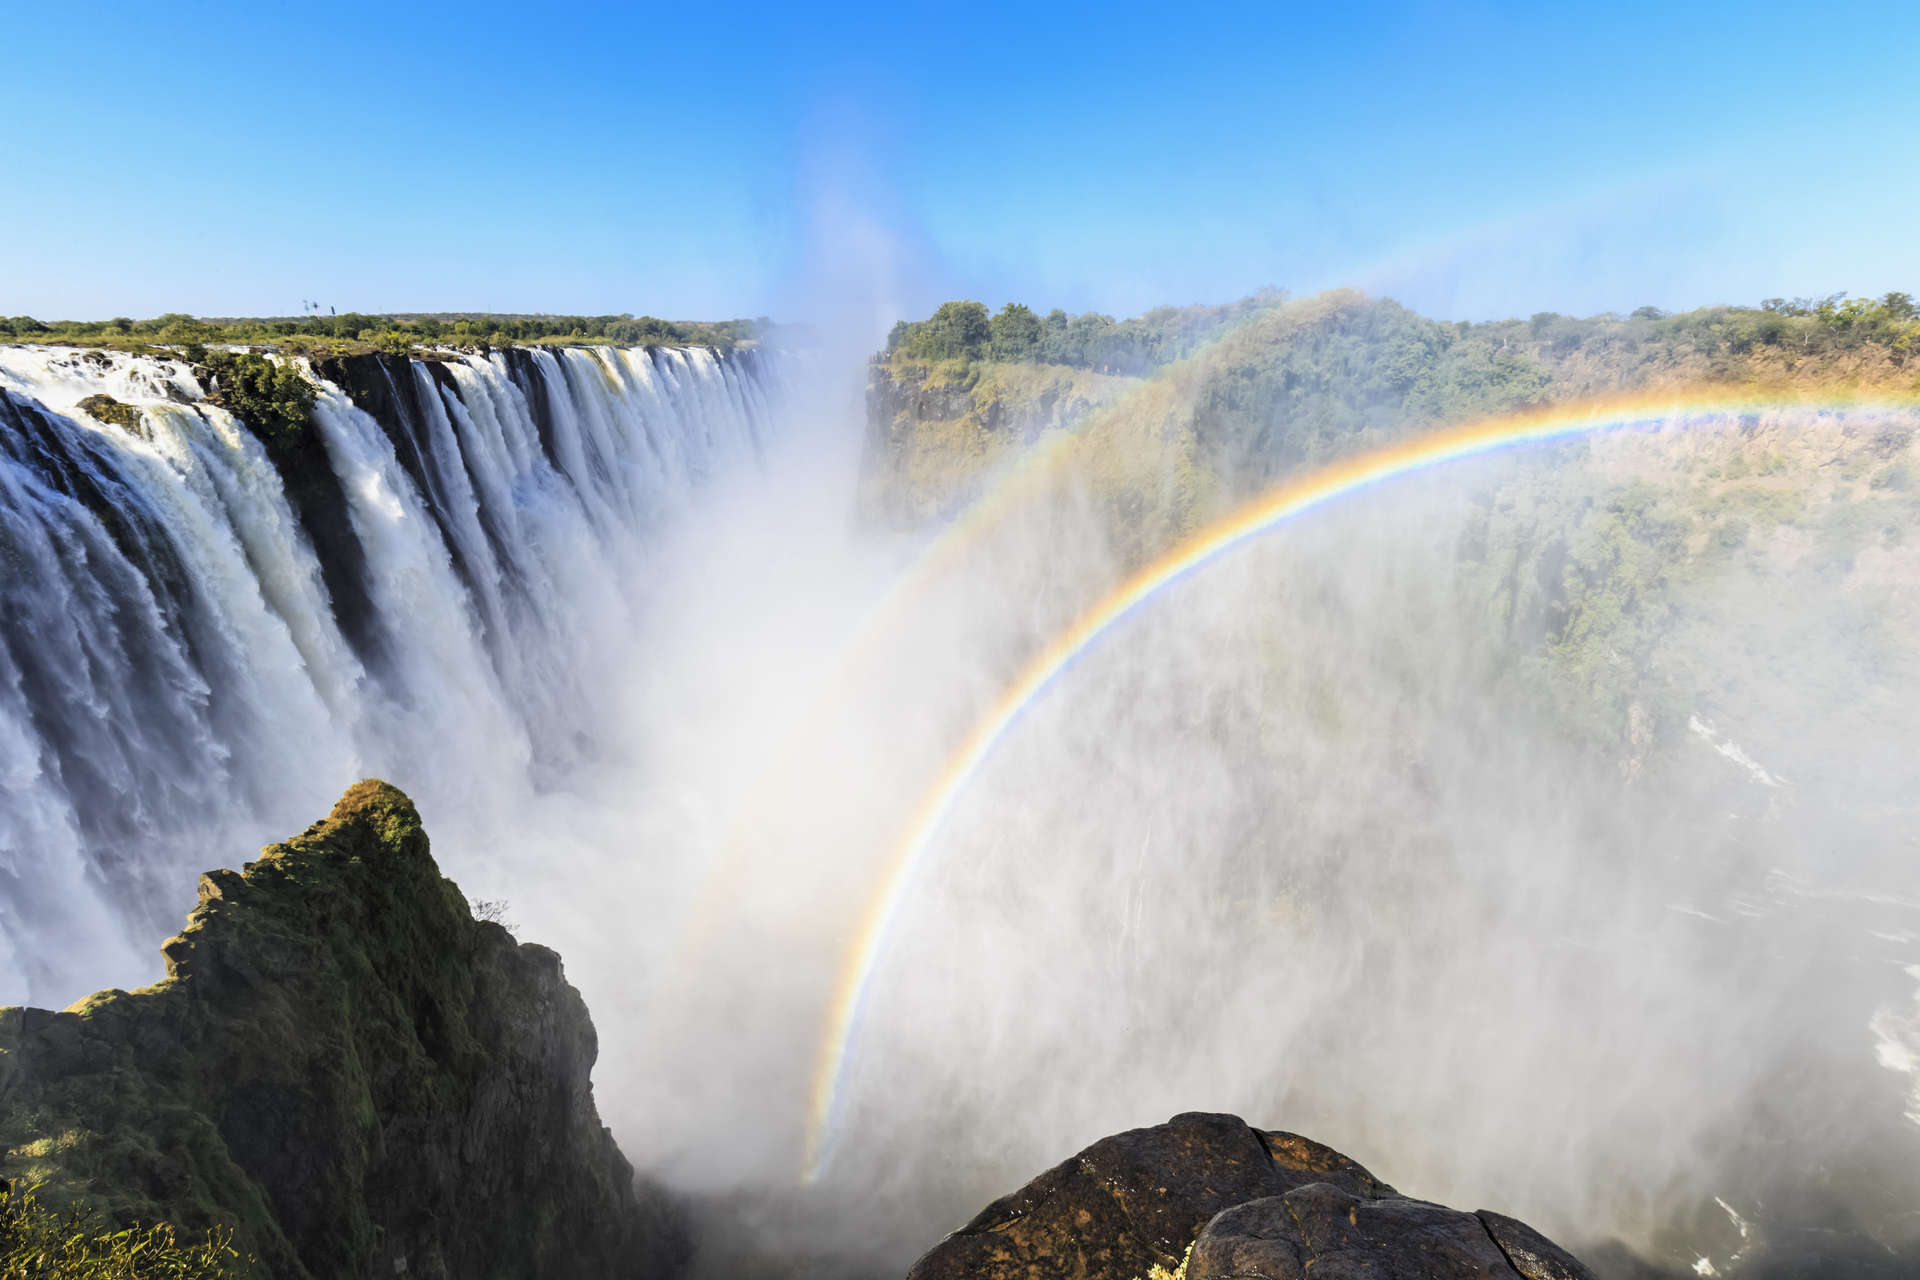 The Victoria Falls is nature at its most powerful